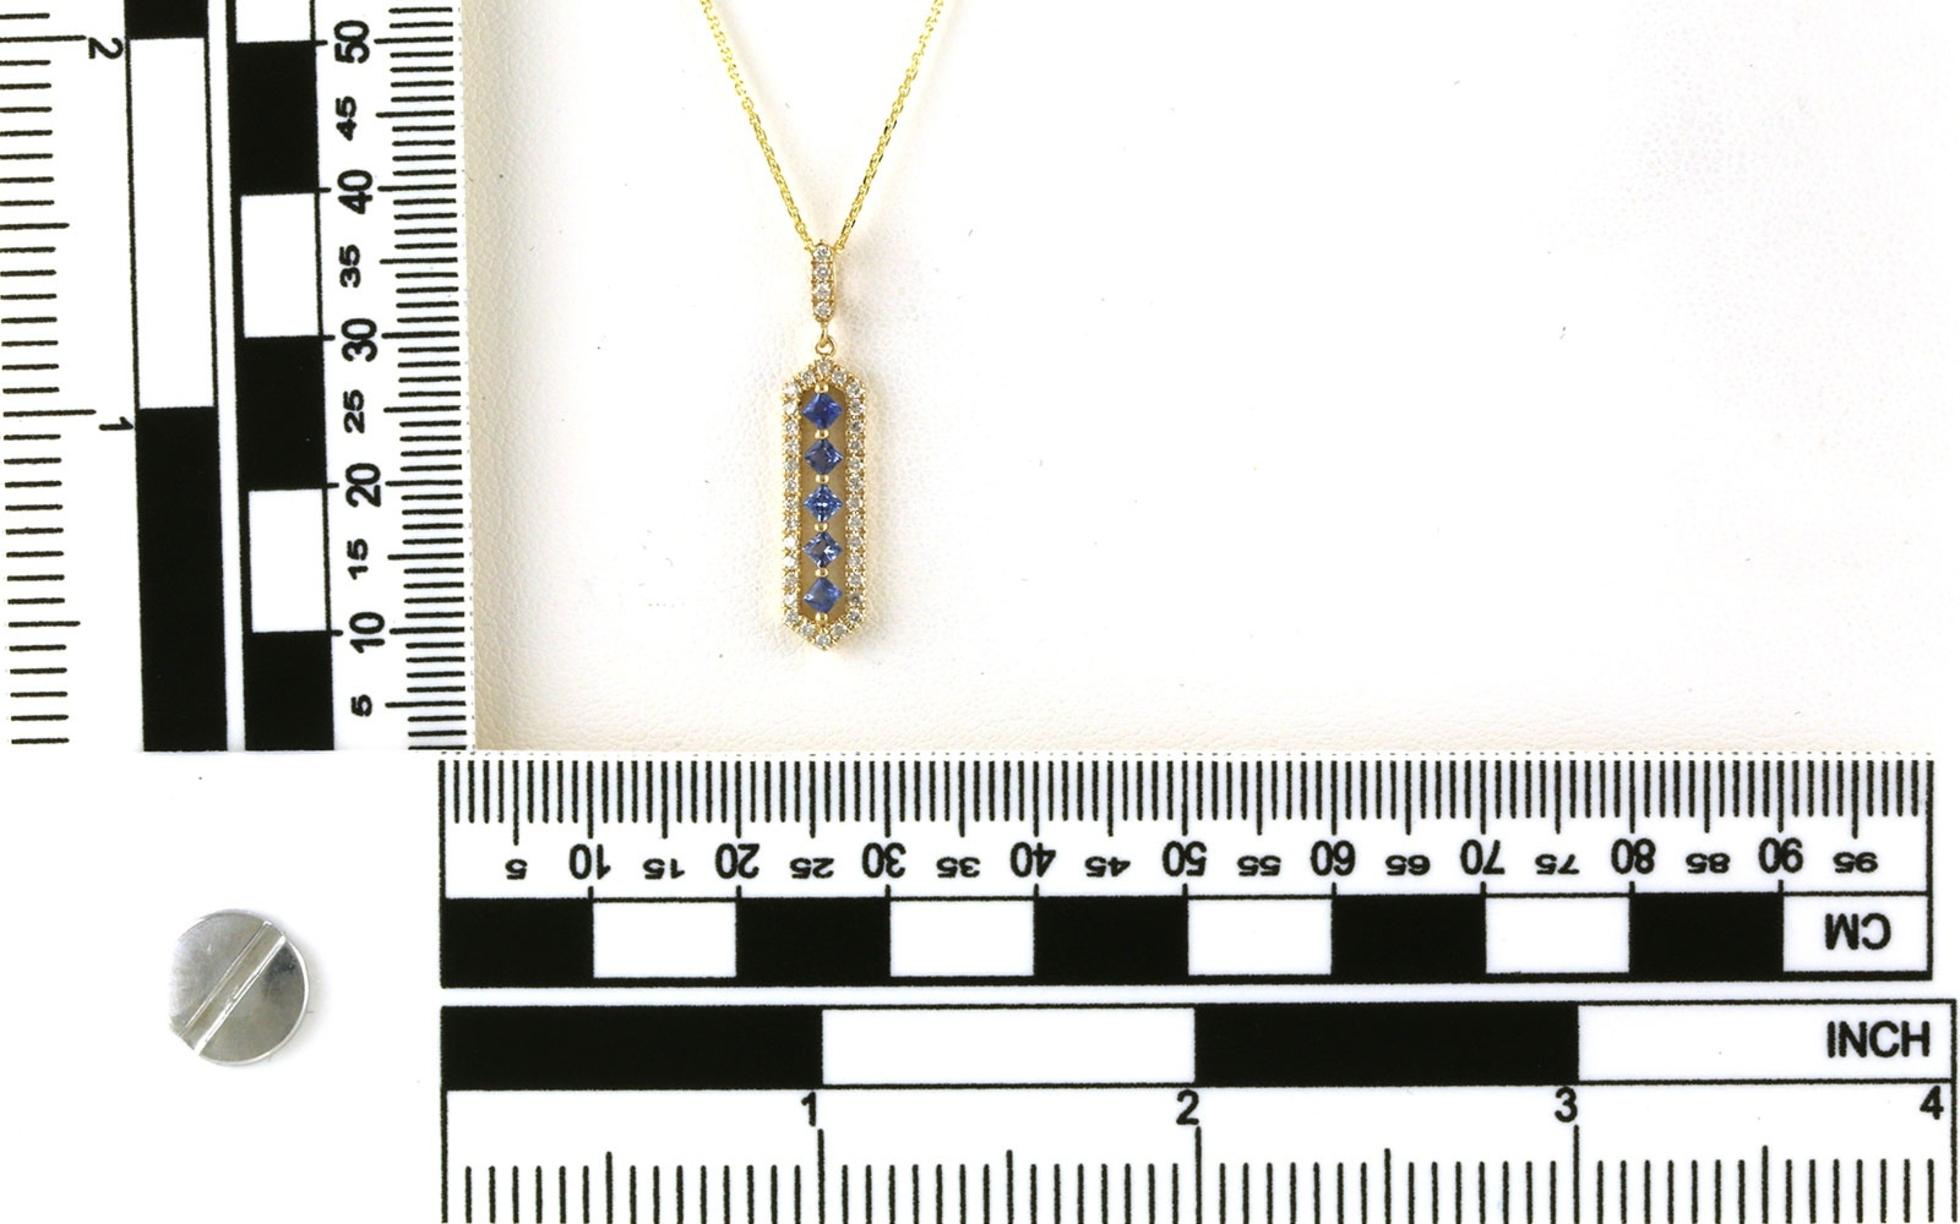 Elongated Hexagonal 5-Stone Drop Style Montana Yogo Sapphire and Diamond Necklace in Yellow Gold (0.50cts TWT) Scale